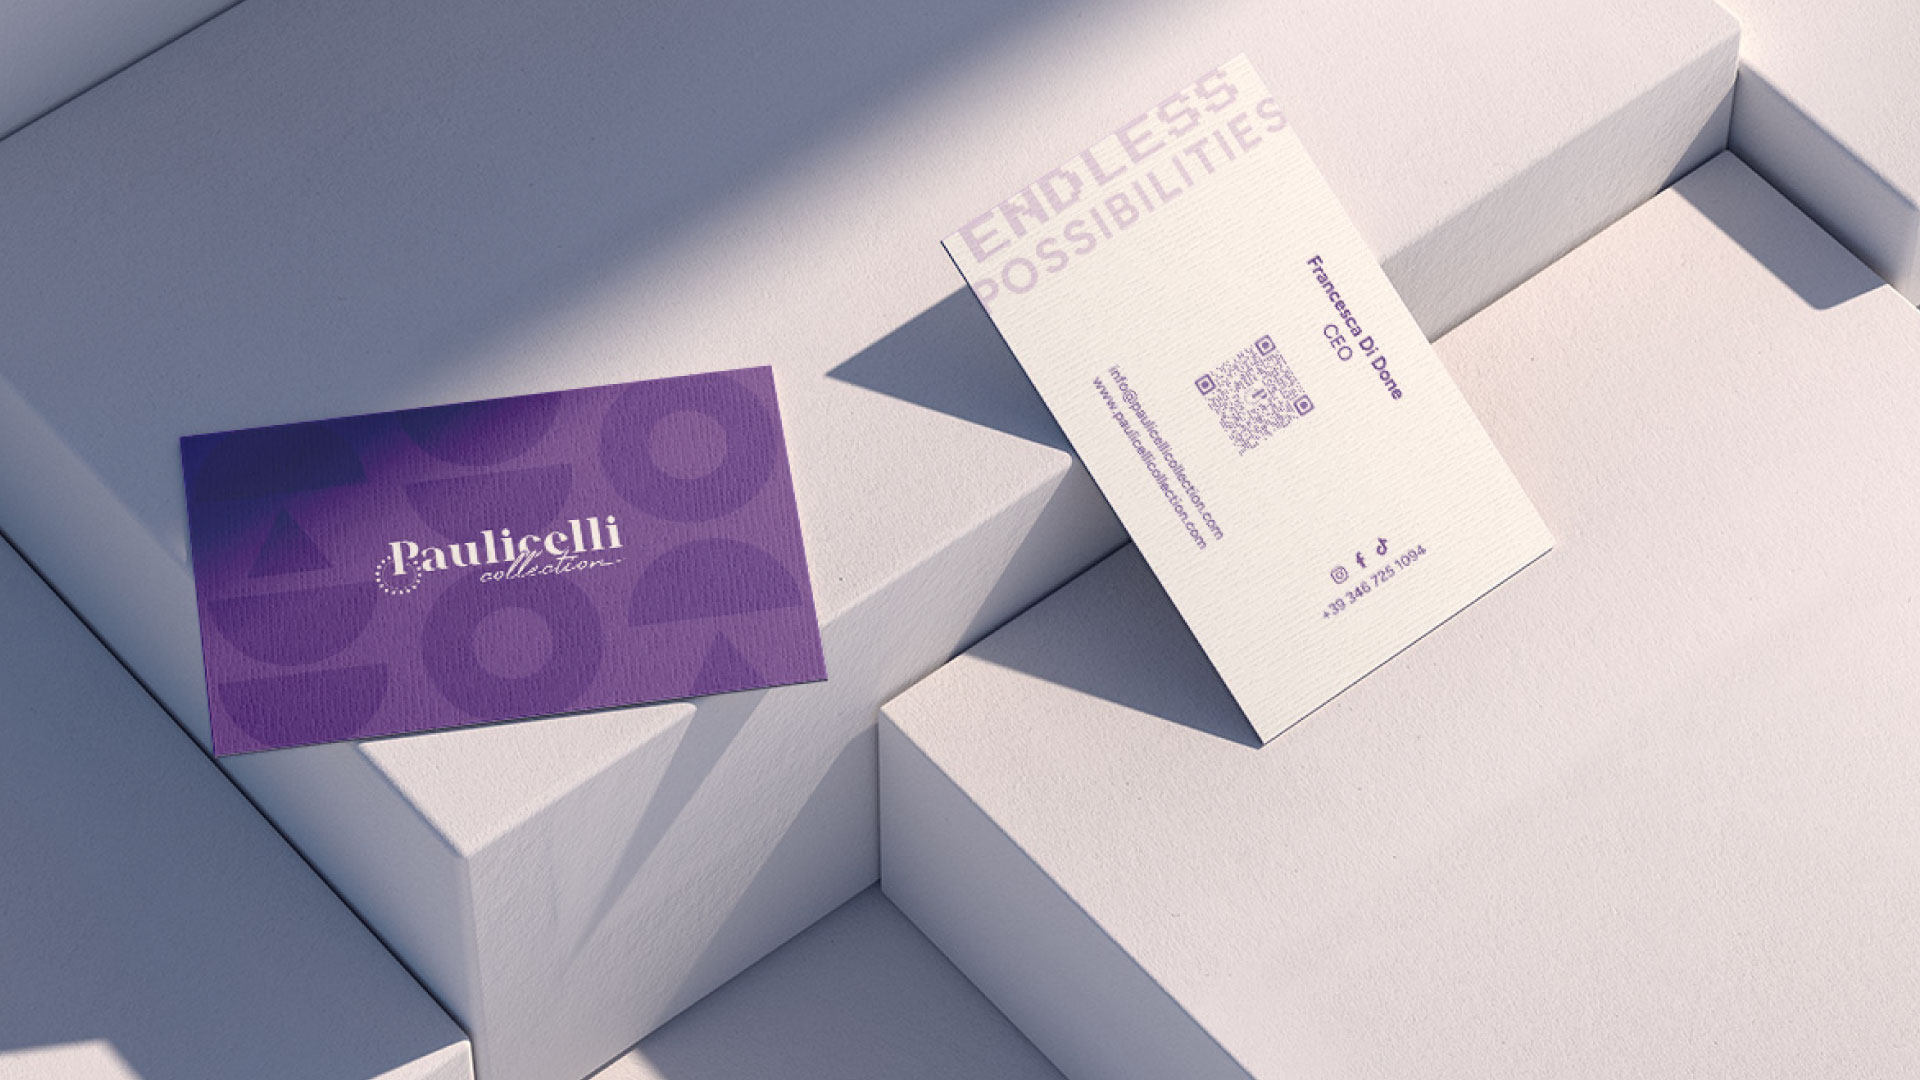 Paulicelli Collection – Brand identity